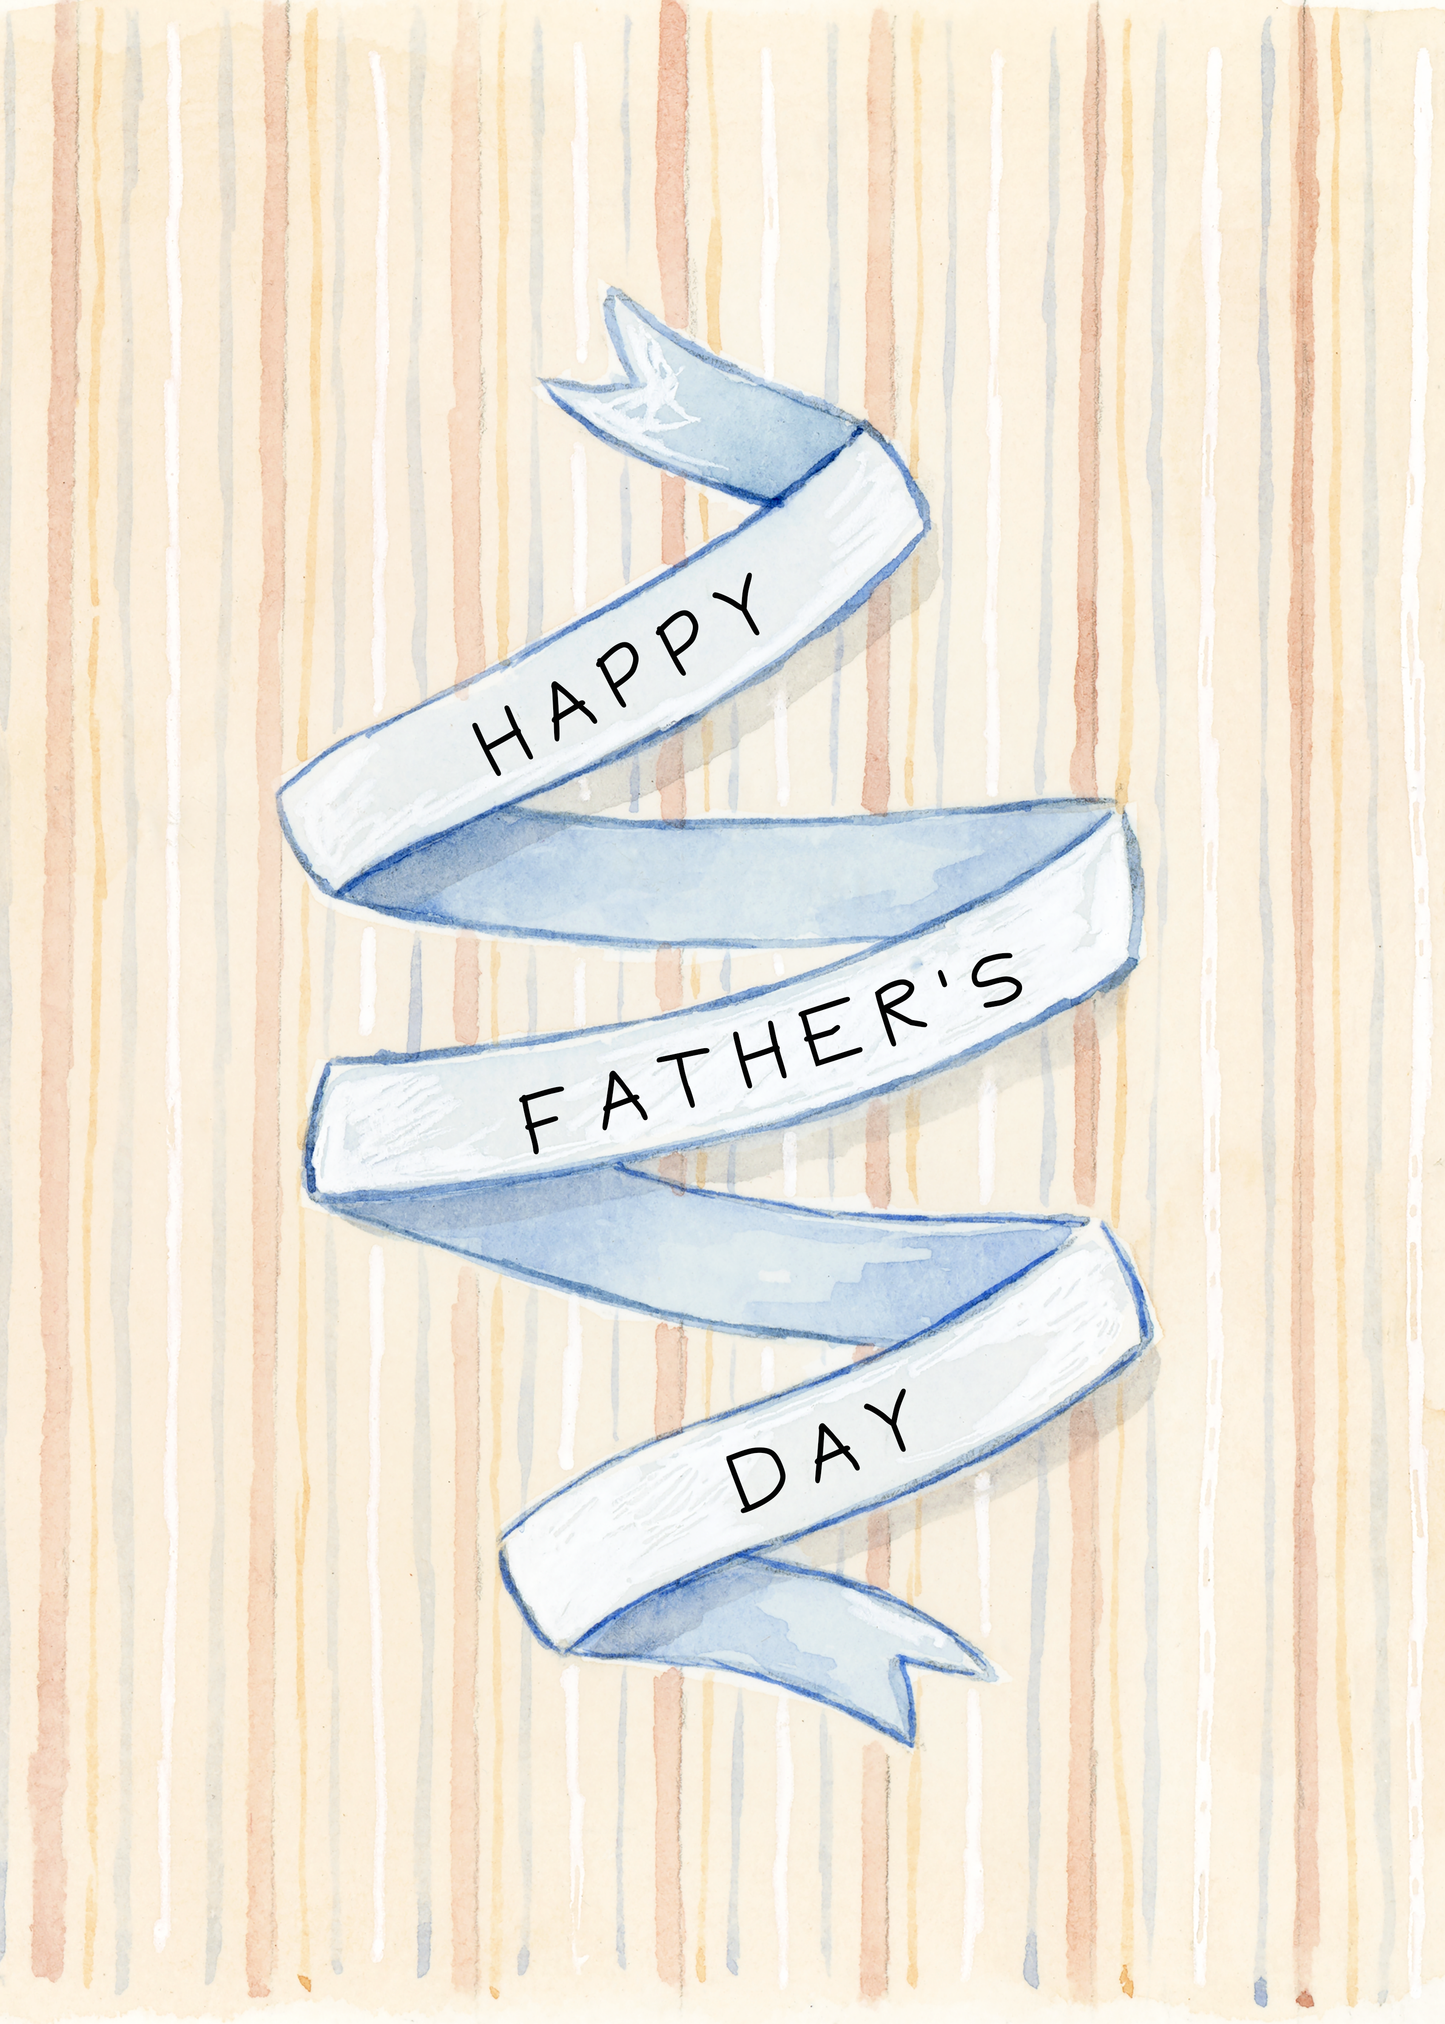 FREE Father's Day Cards (set of 2) 5x7 Digital Downloads